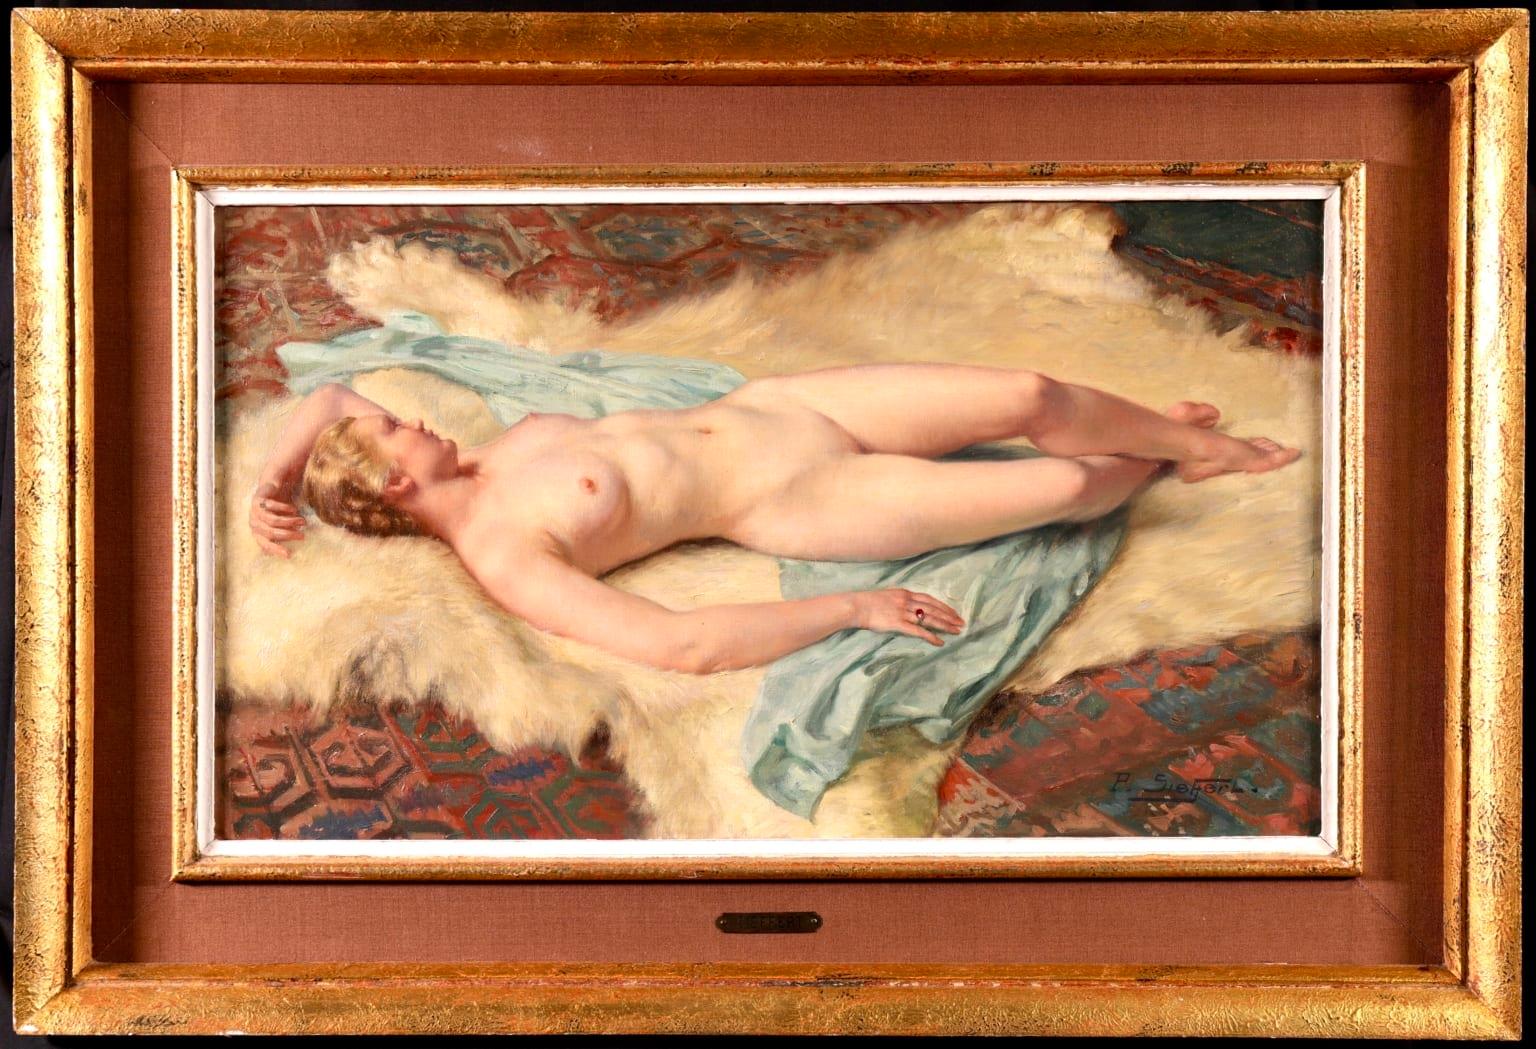 A beautiful and delicately painted oil on canvas circa 1930 by French impressionist painter Paul Sieffert depicting a nude laid on a pale green sheet on top of a fur rug. This work is number 316 in the oeuvre of Paul Sieffert - numbered by the